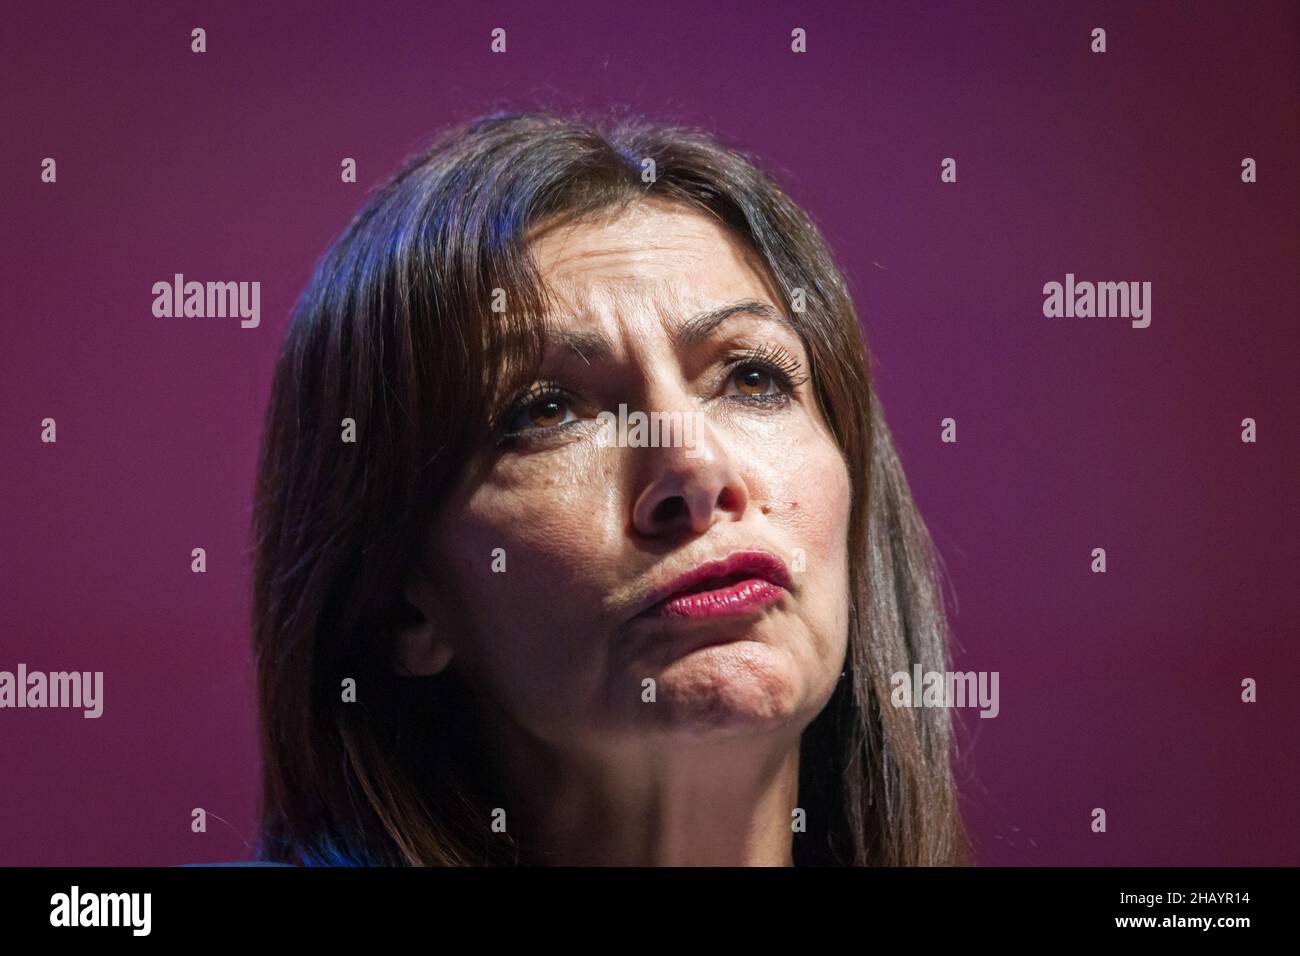 Anne Hidalgo delivers a speech during a meeting in Perpignan. The first meeting of Anne Hidalgo, representative of the socialist party to the French presidential election of 2022 has gathered barely more than 1000 people. Her score estimated at 3% by the last polls poses a problem of financing the electoral campaign. It will be necessary to reach at least a score of 5% in the first round to obtain a refunding of the expenses of campaign by the state. At the meeting in Perpignan, the militants only gave 580 Euros to the campaign financing account. (Photo by Laurent Coust/SOPA Images/Sipa USA) Stock Photo